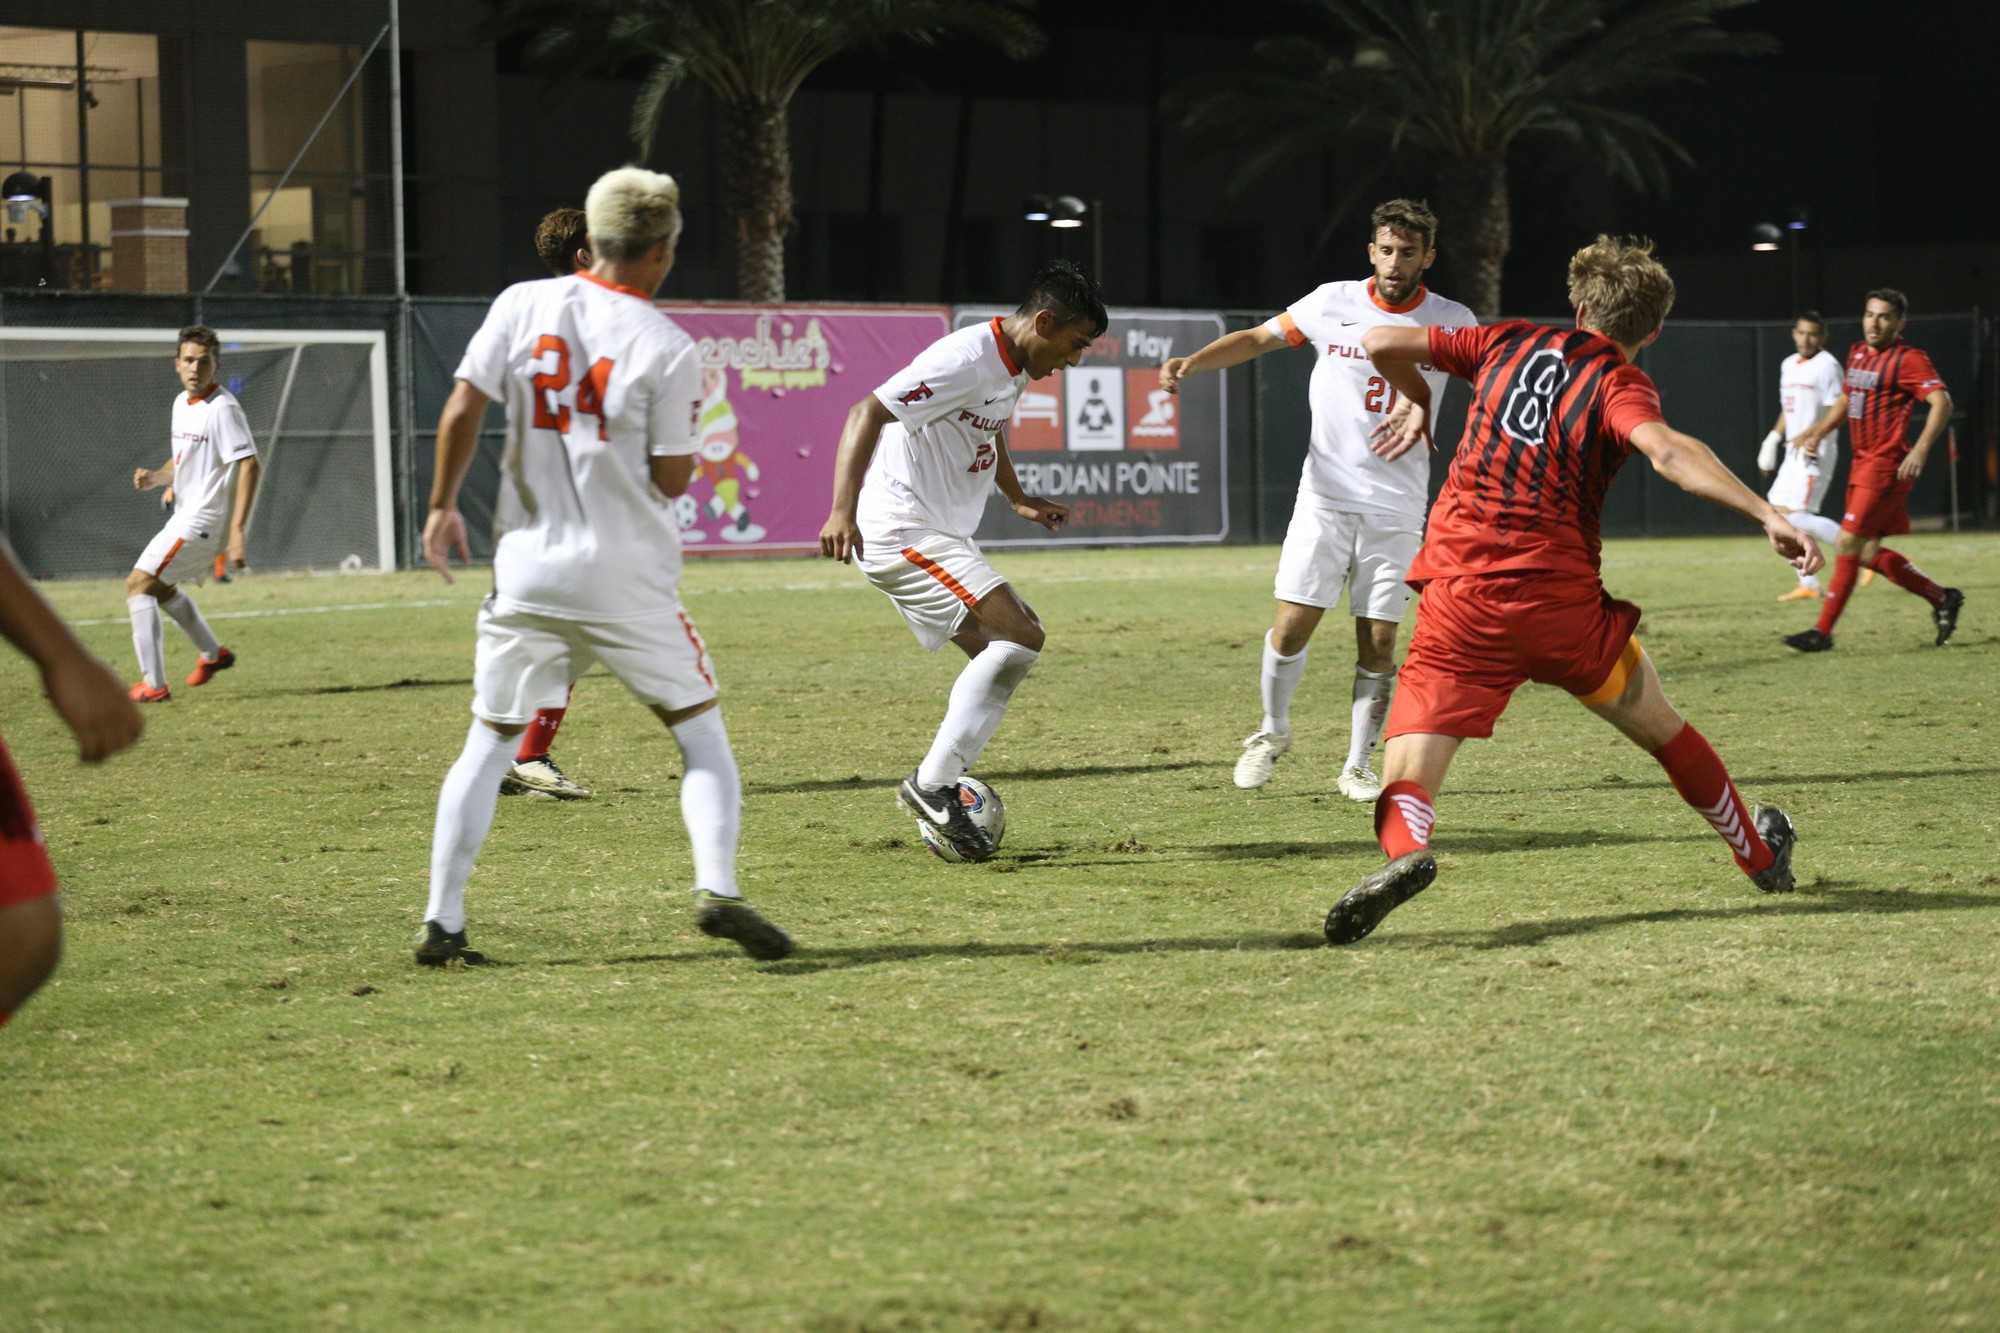 CSUN player attempts to steall the ball from opposing team